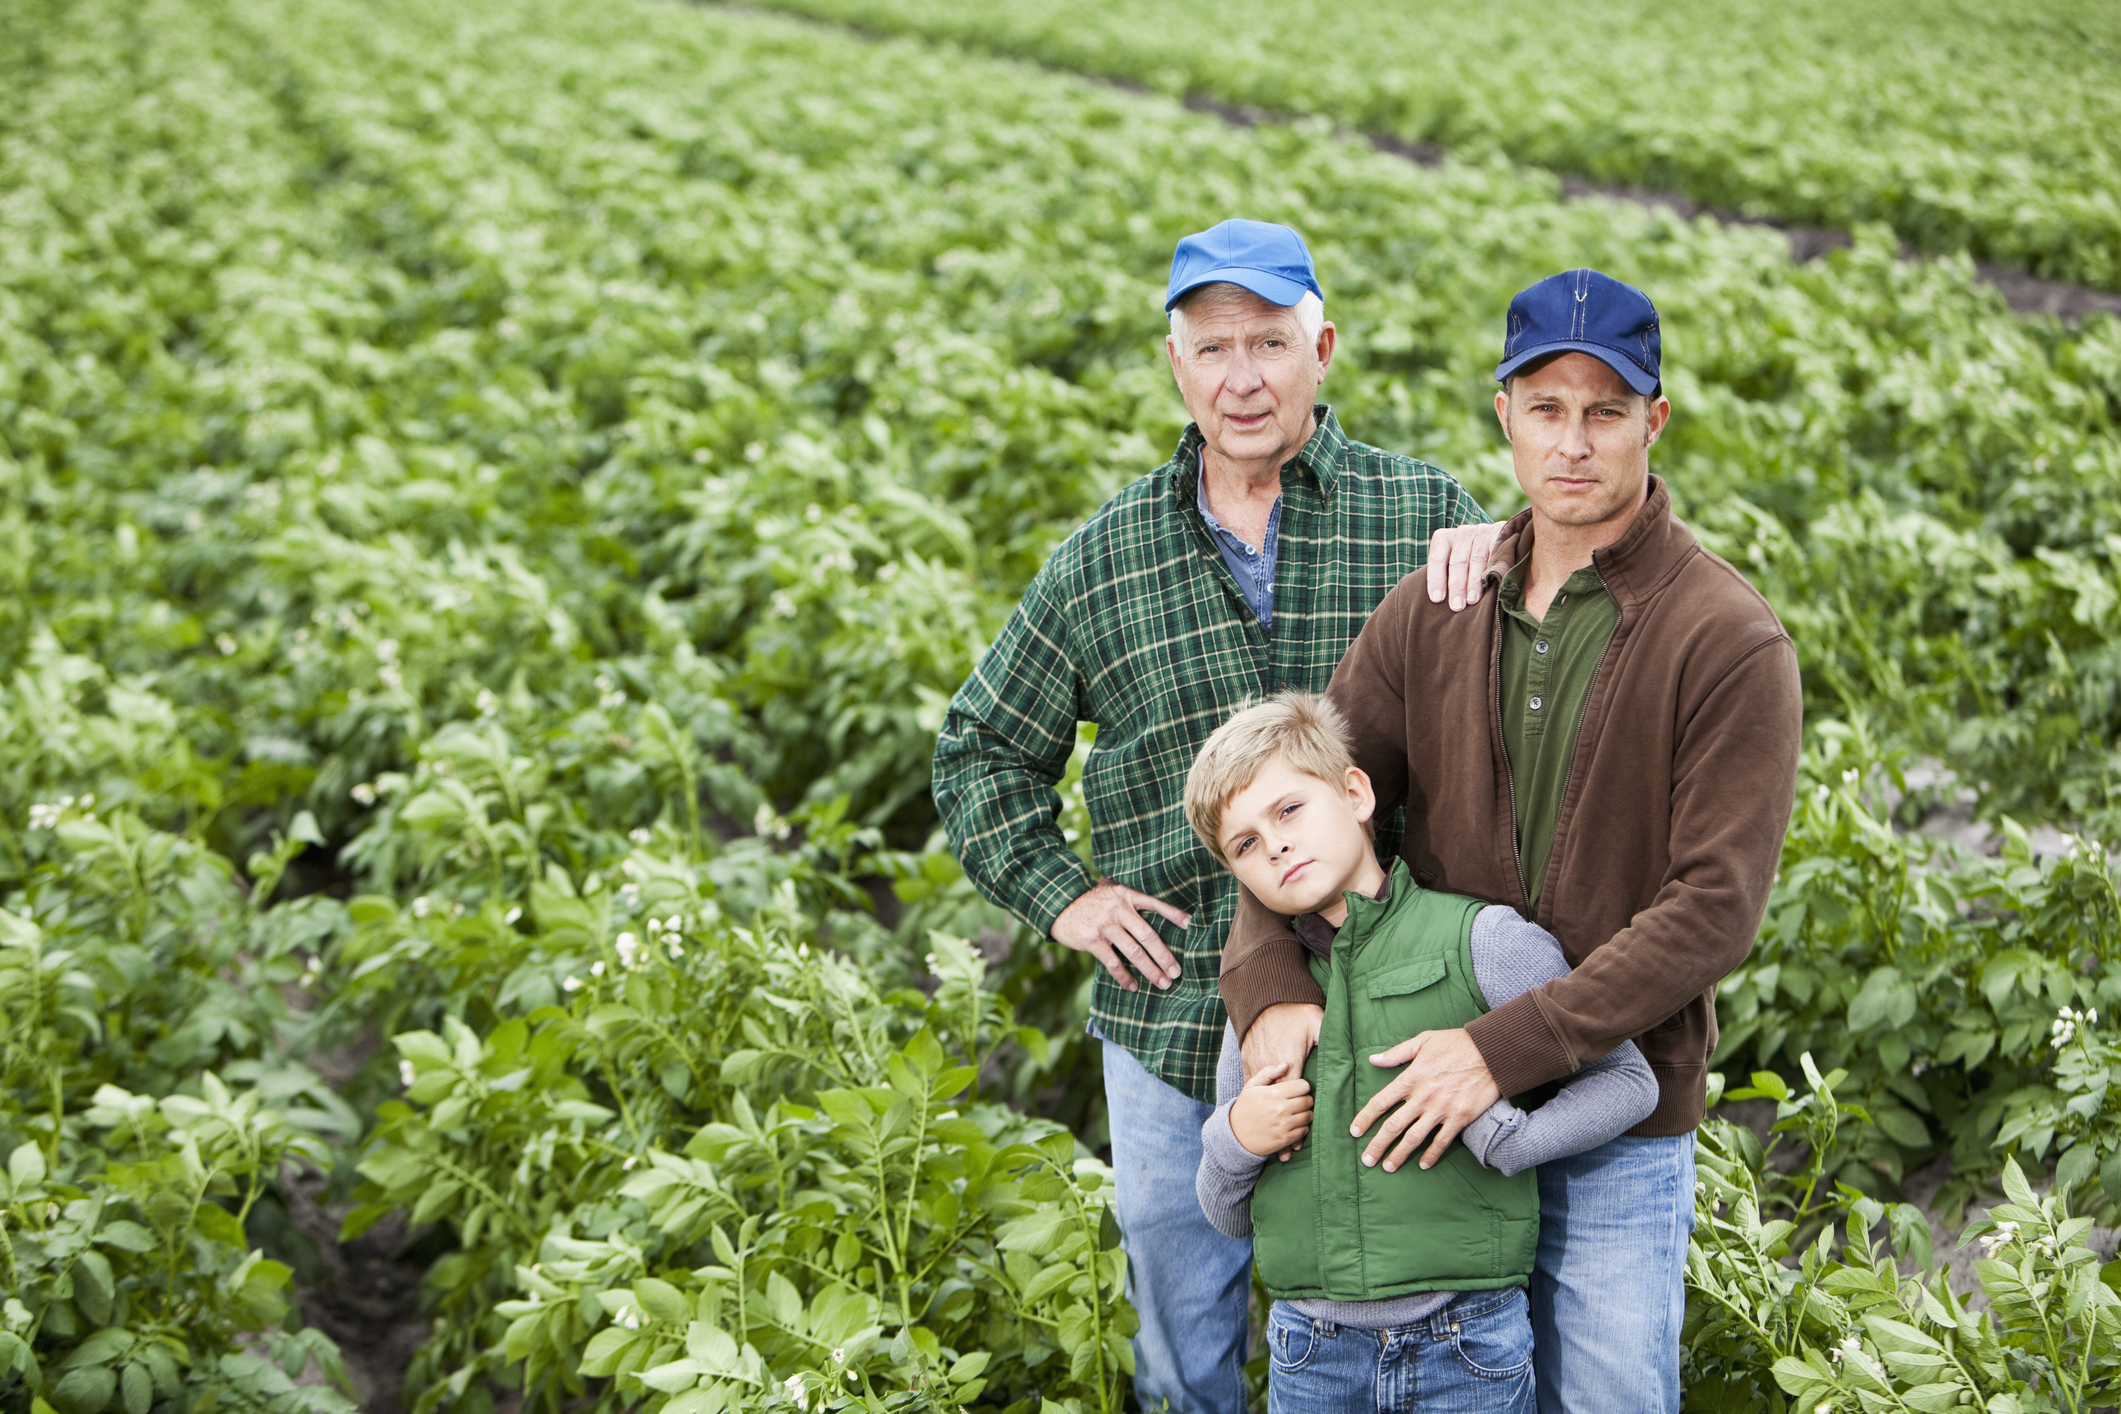 Portrait of three generations of men working on the family farm. The senior man, his adult son and grandson are standing together in a lush, green field of rows of potato plants. (Photo: iStock - kali9)